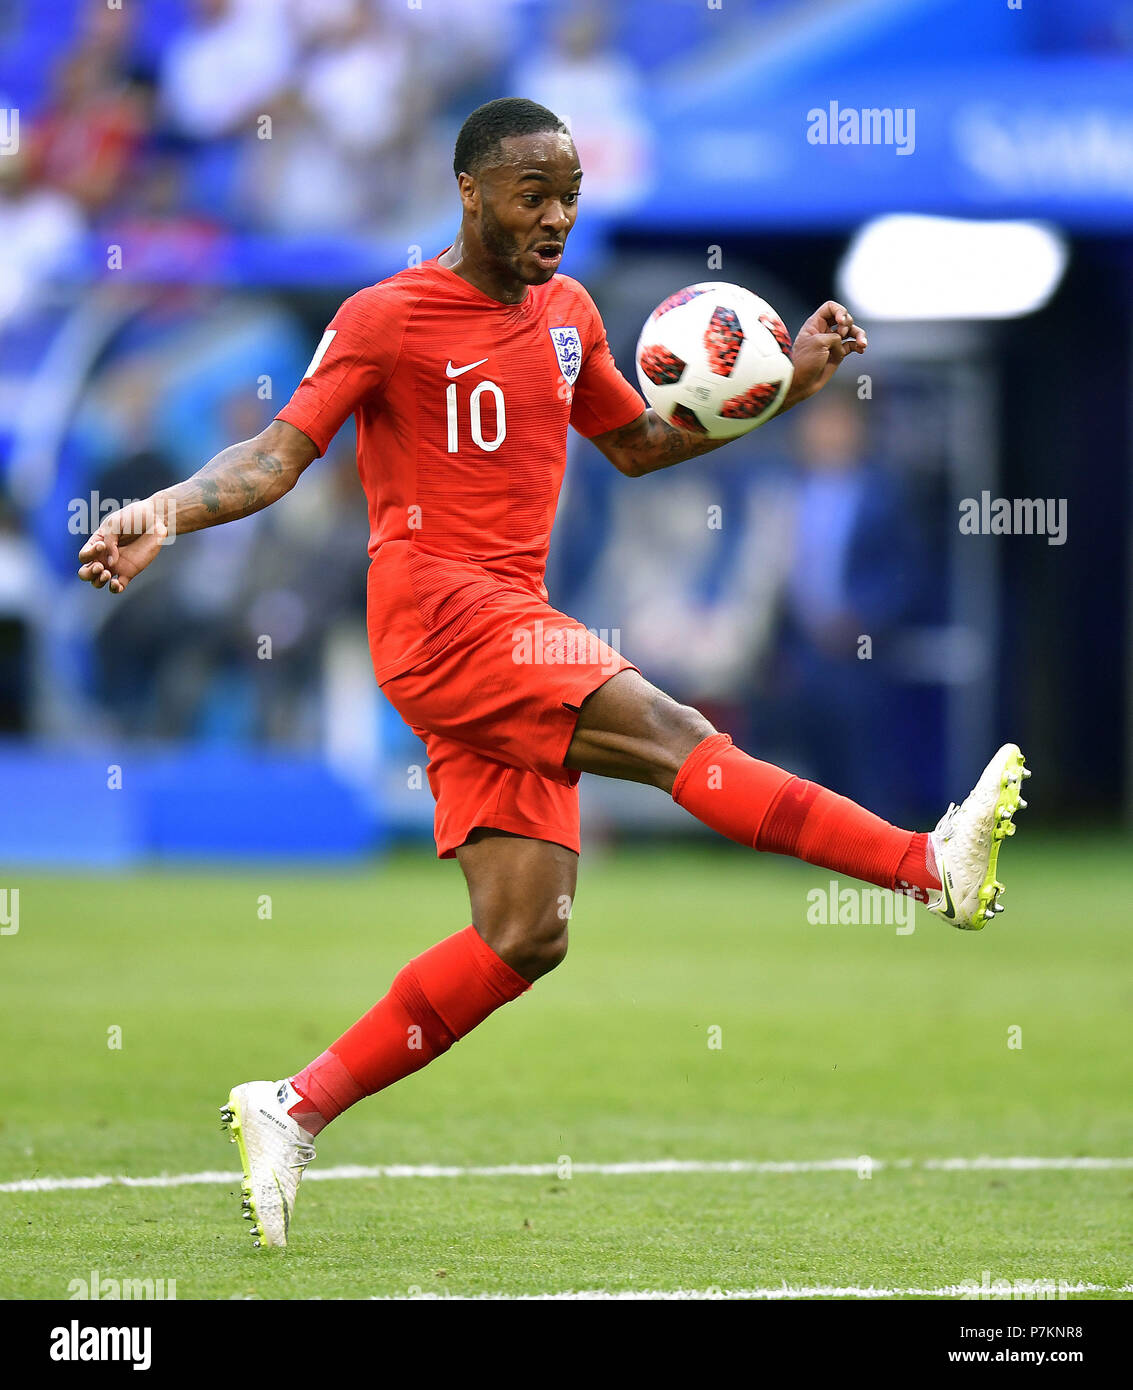 Samara, Russia. 7th July, 2018. Raheem Sterling of England controls the ball during the 2018 FIFA World Cup quarter-final match between Sweden and England in Samara, Russia, July 7, 2018. Credit: Chen Yichen/Xinhua/Alamy Live News Stock Photo